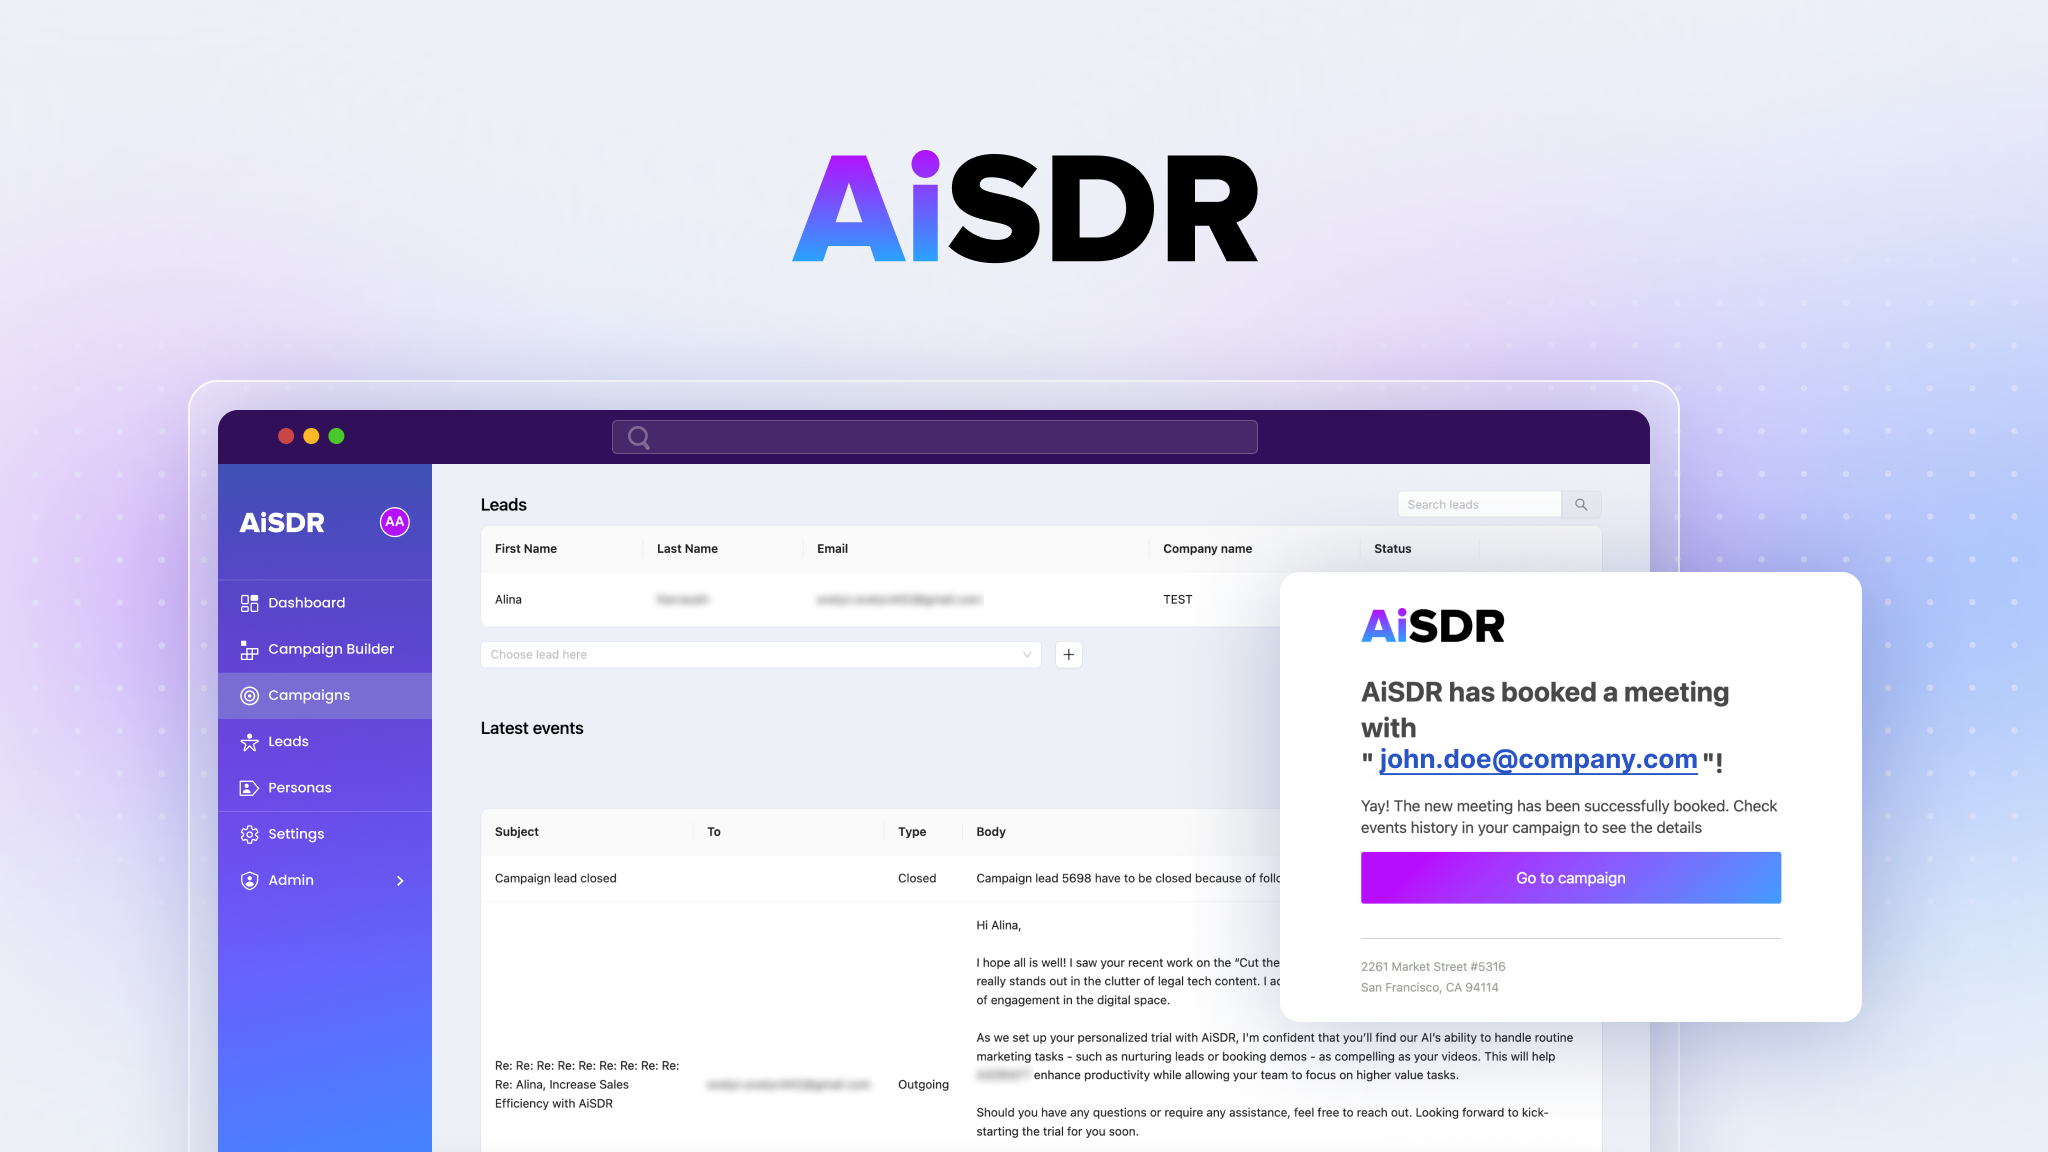 AiSDR campaign manager